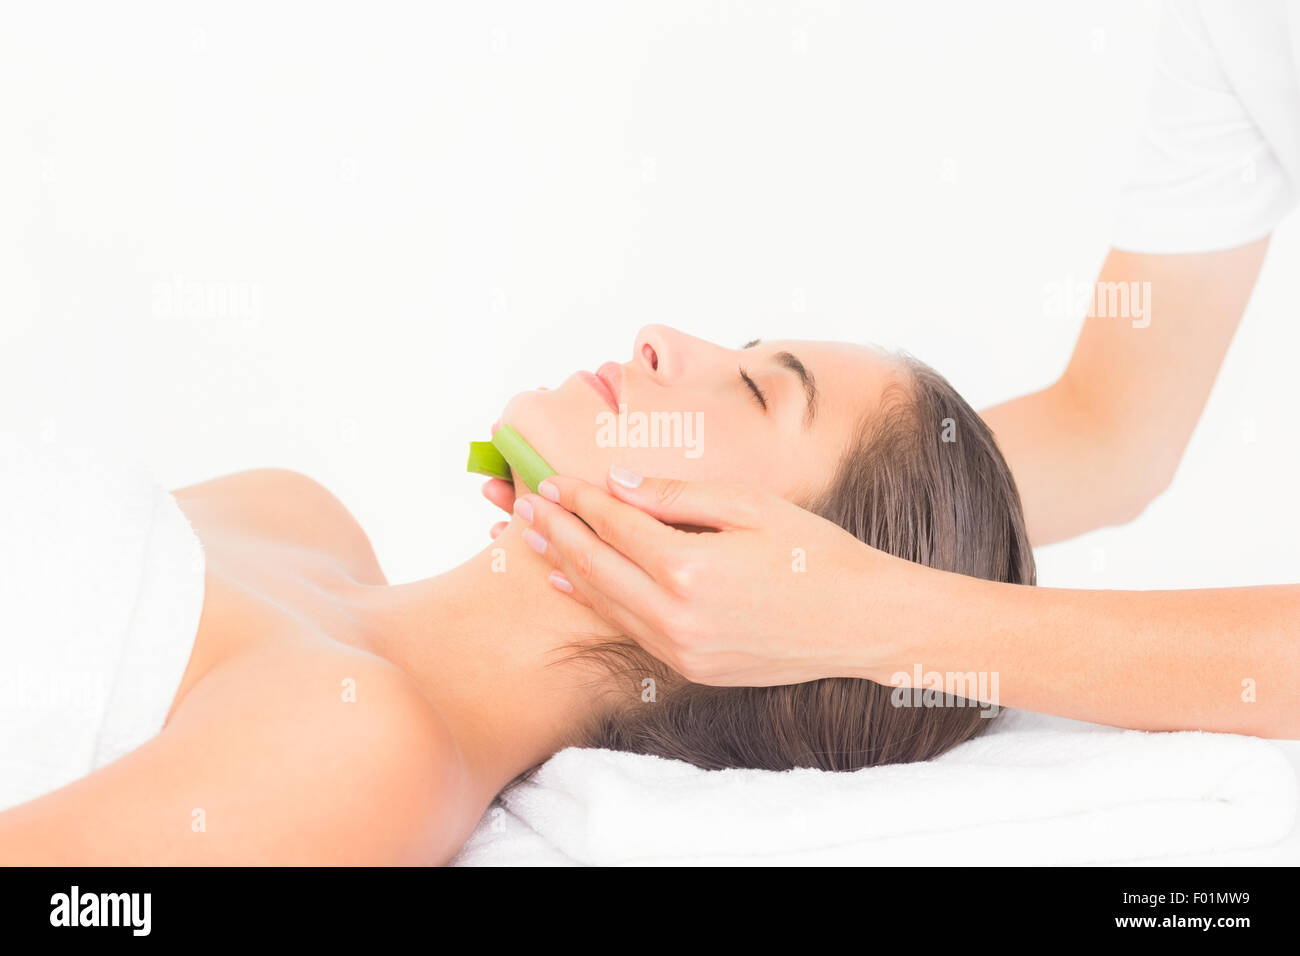 woman who practice natural medicine Stock Photo